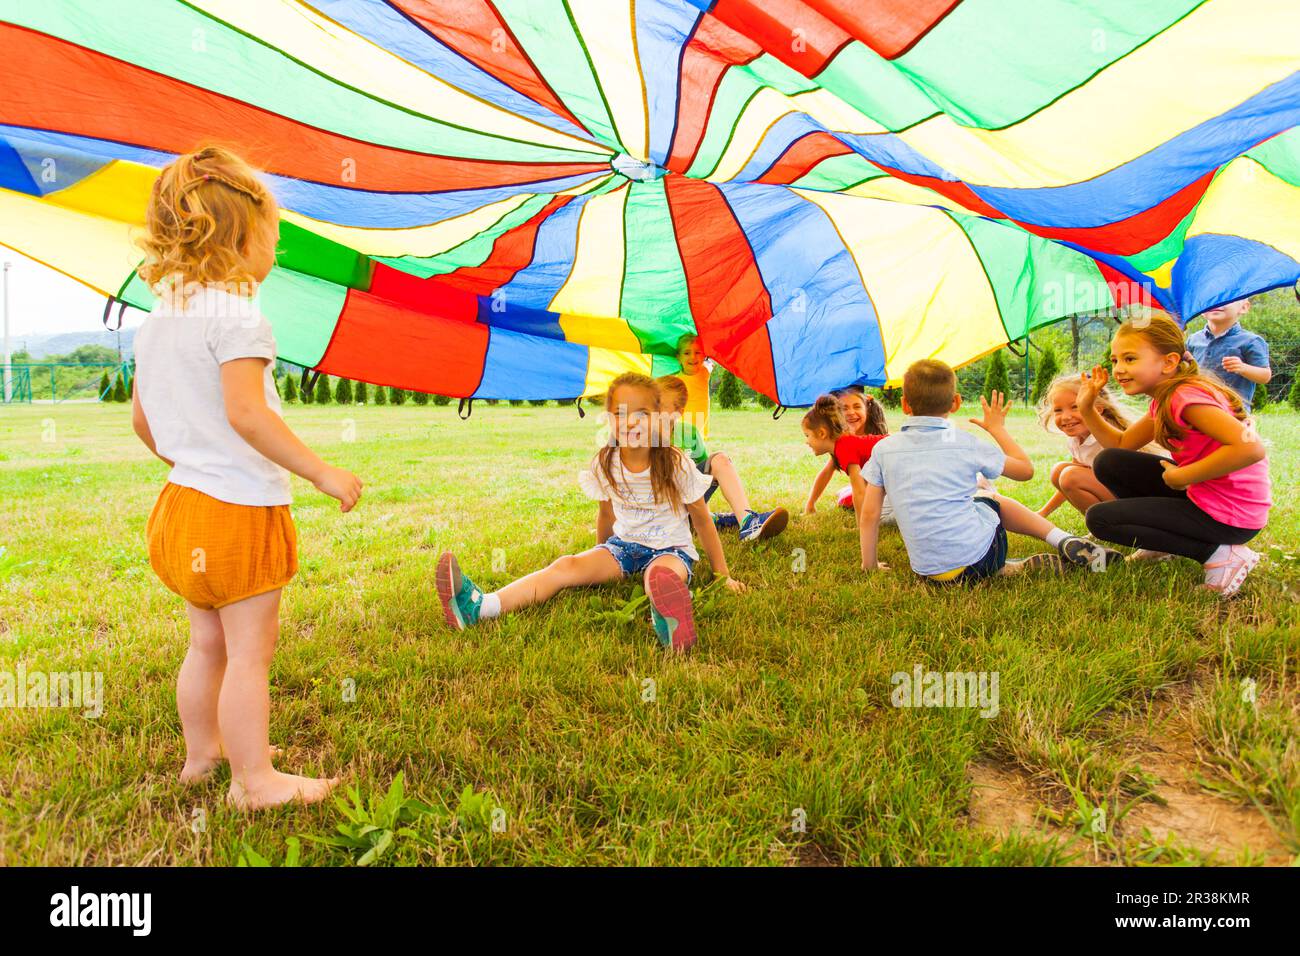 Funny games under colorful canopy in the summer outdoors Stock Photo